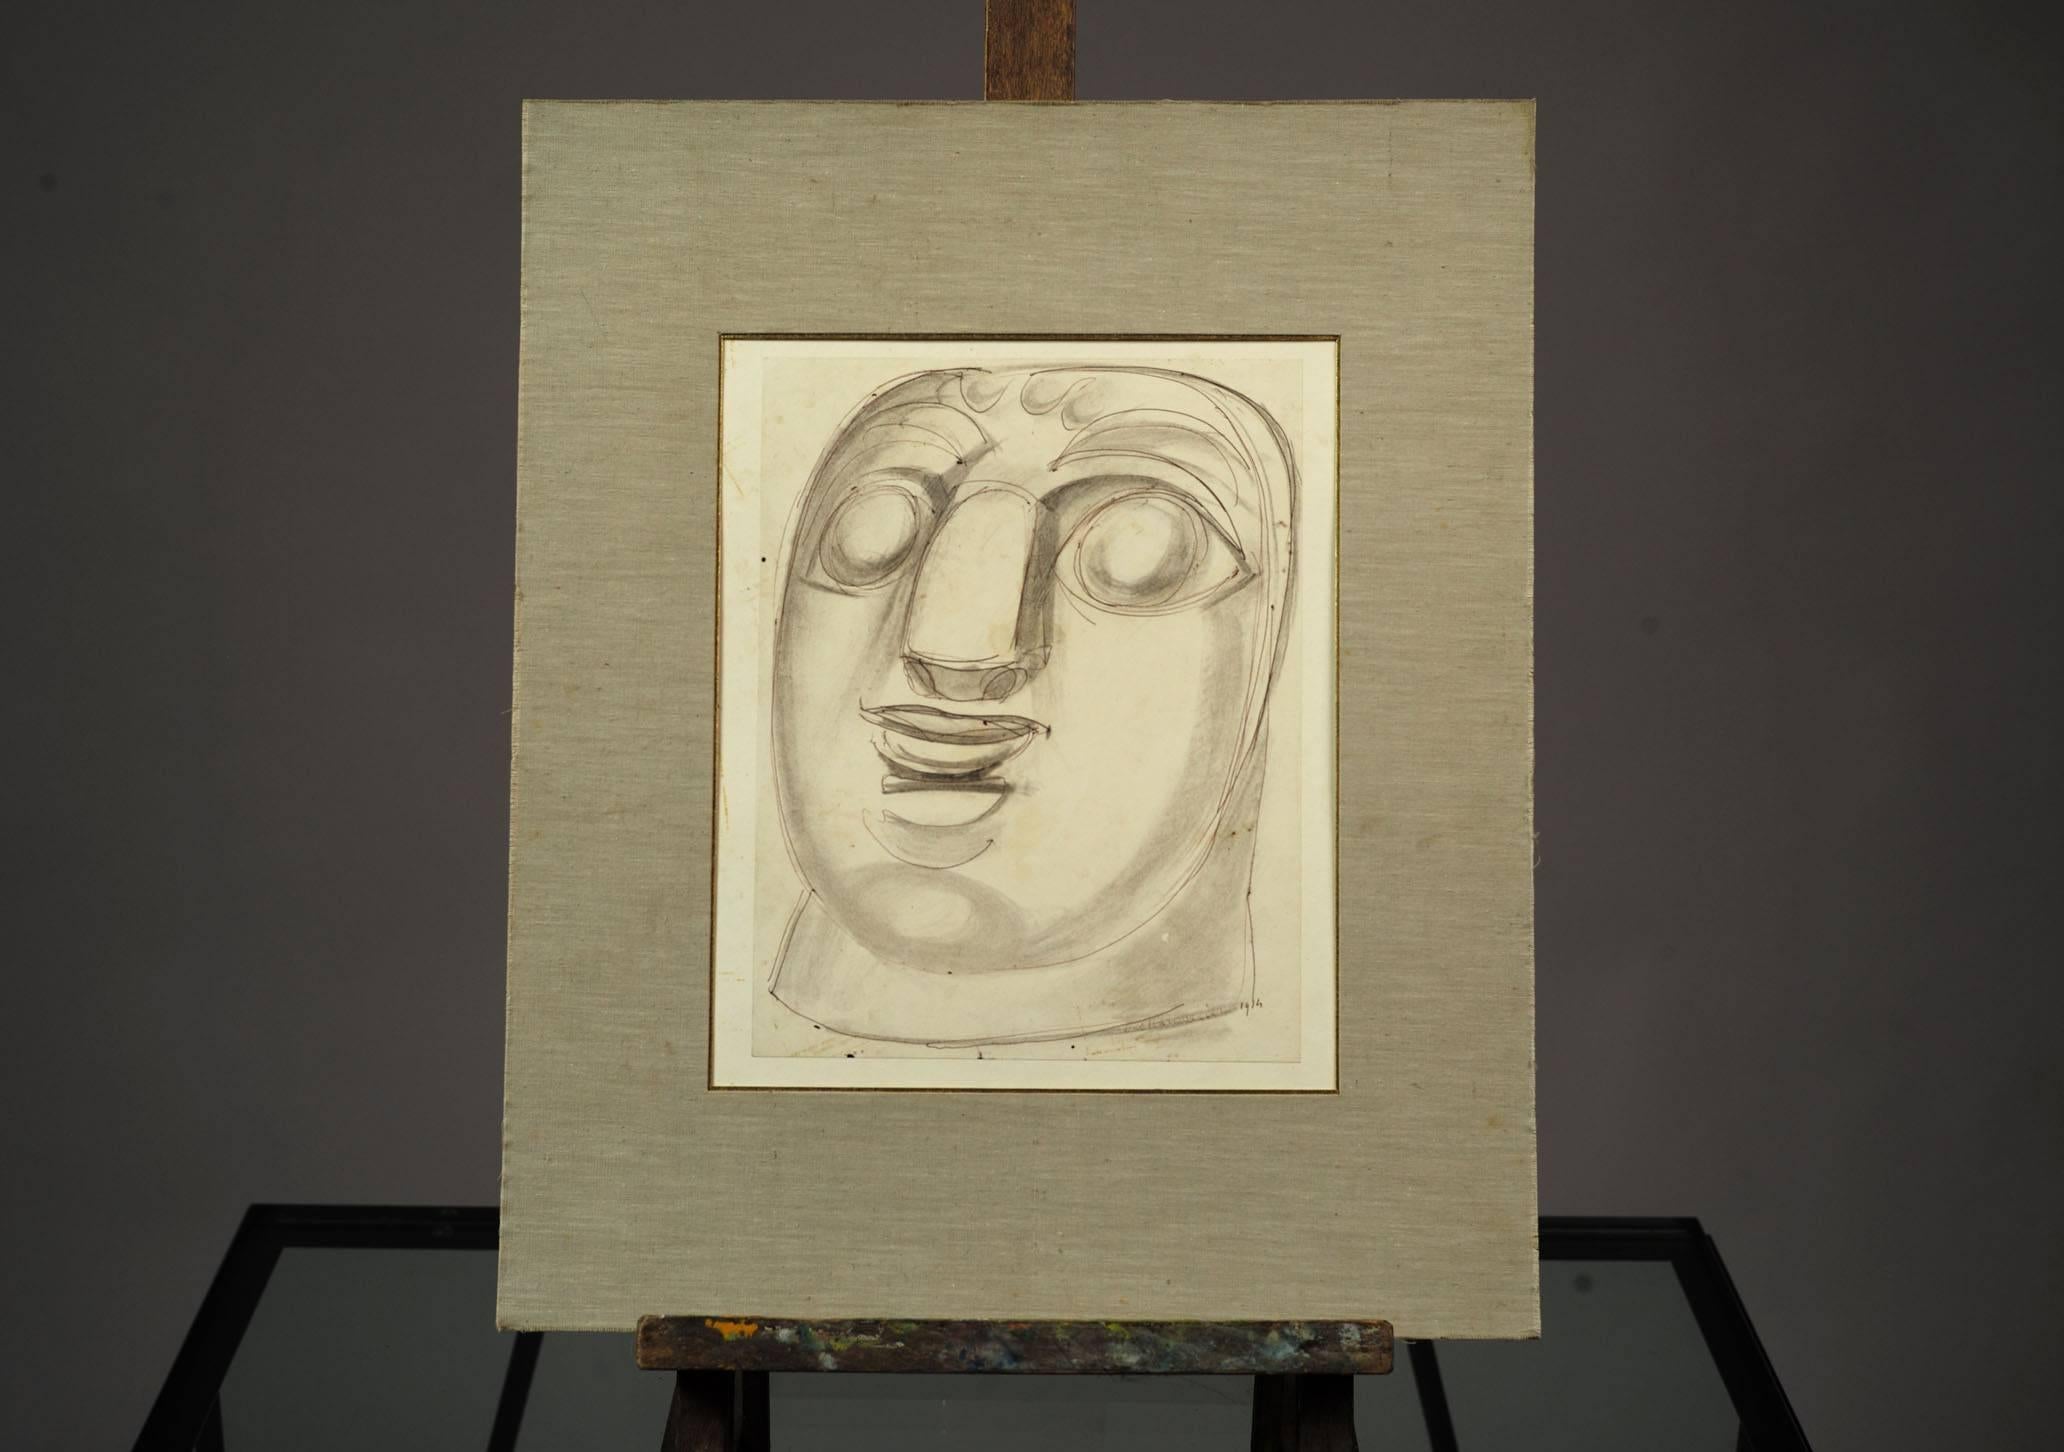 Mask, drawing with pencil and pen by Henry de Waroquier, signed and dated 1914 in the lower right.
